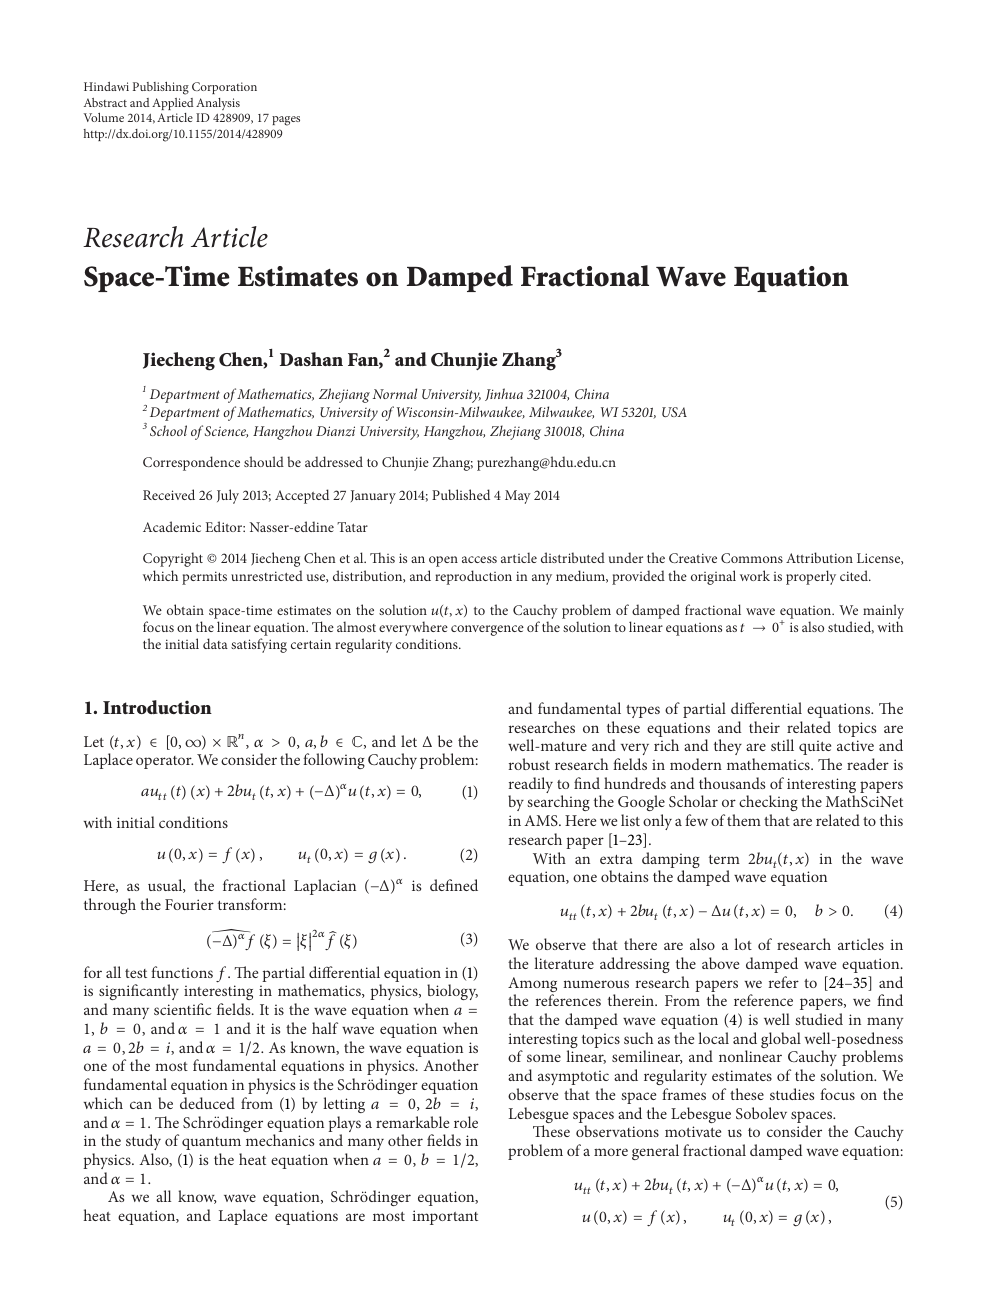 Space Time Estimates On Damped Fractional Wave Equation Topic Of Research Paper In Mathematics Download Scholarly Article Pdf And Read For Free On Cyberleninka Open Science Hub